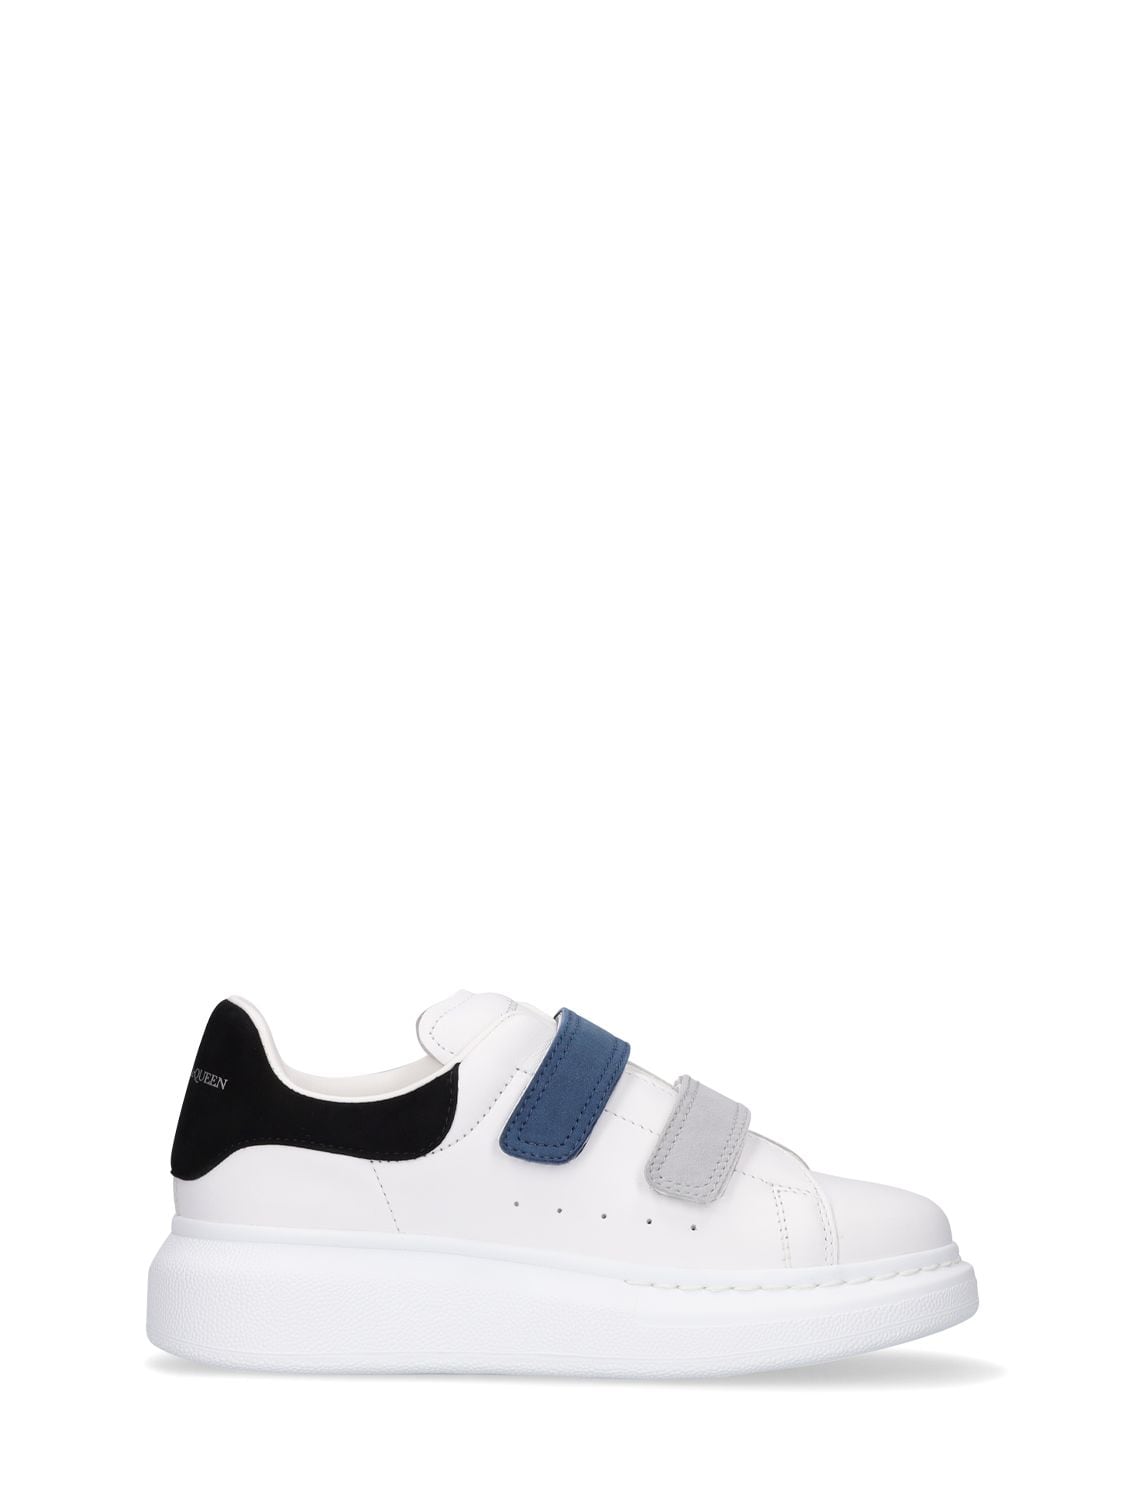 Leather Strap Sneakers